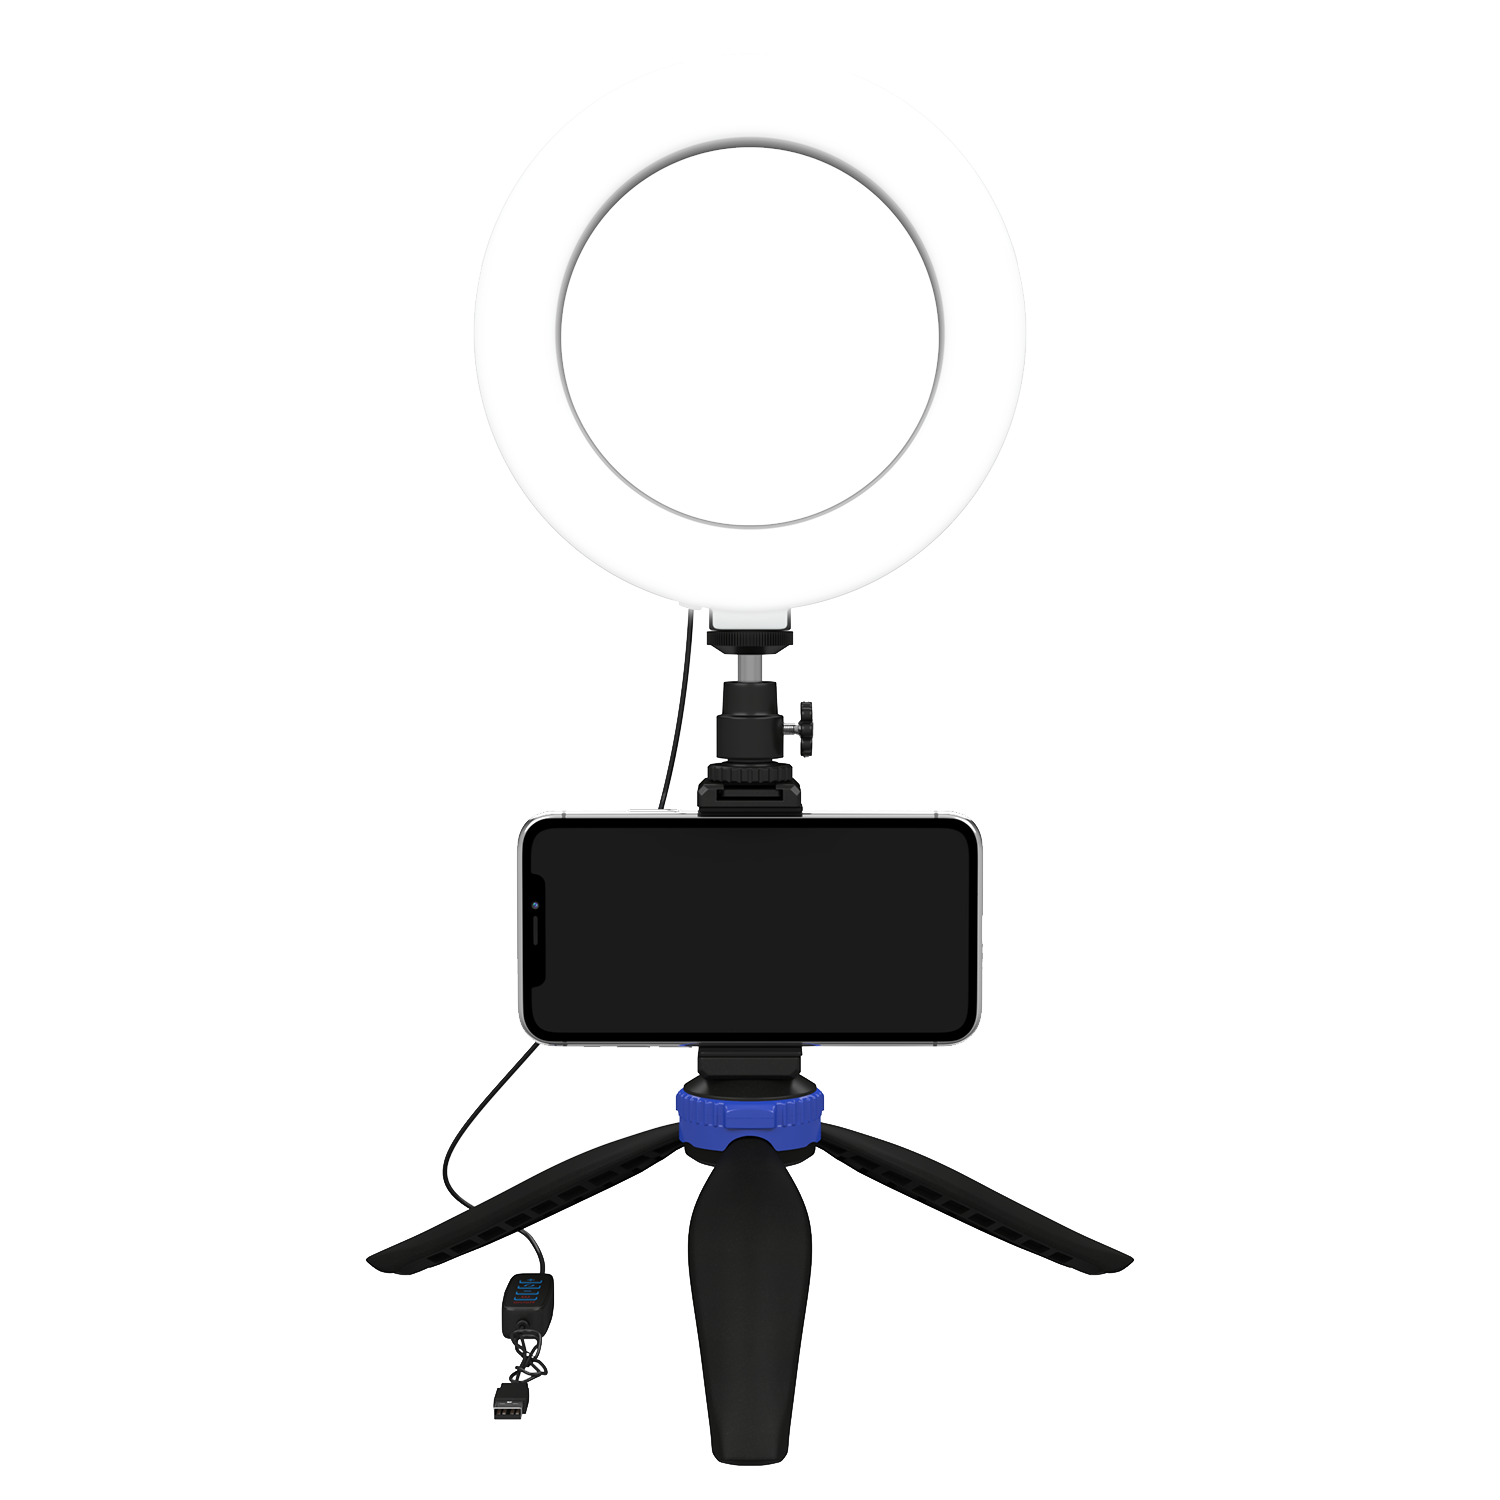 6 Inch Ring Light with Portable Tripod